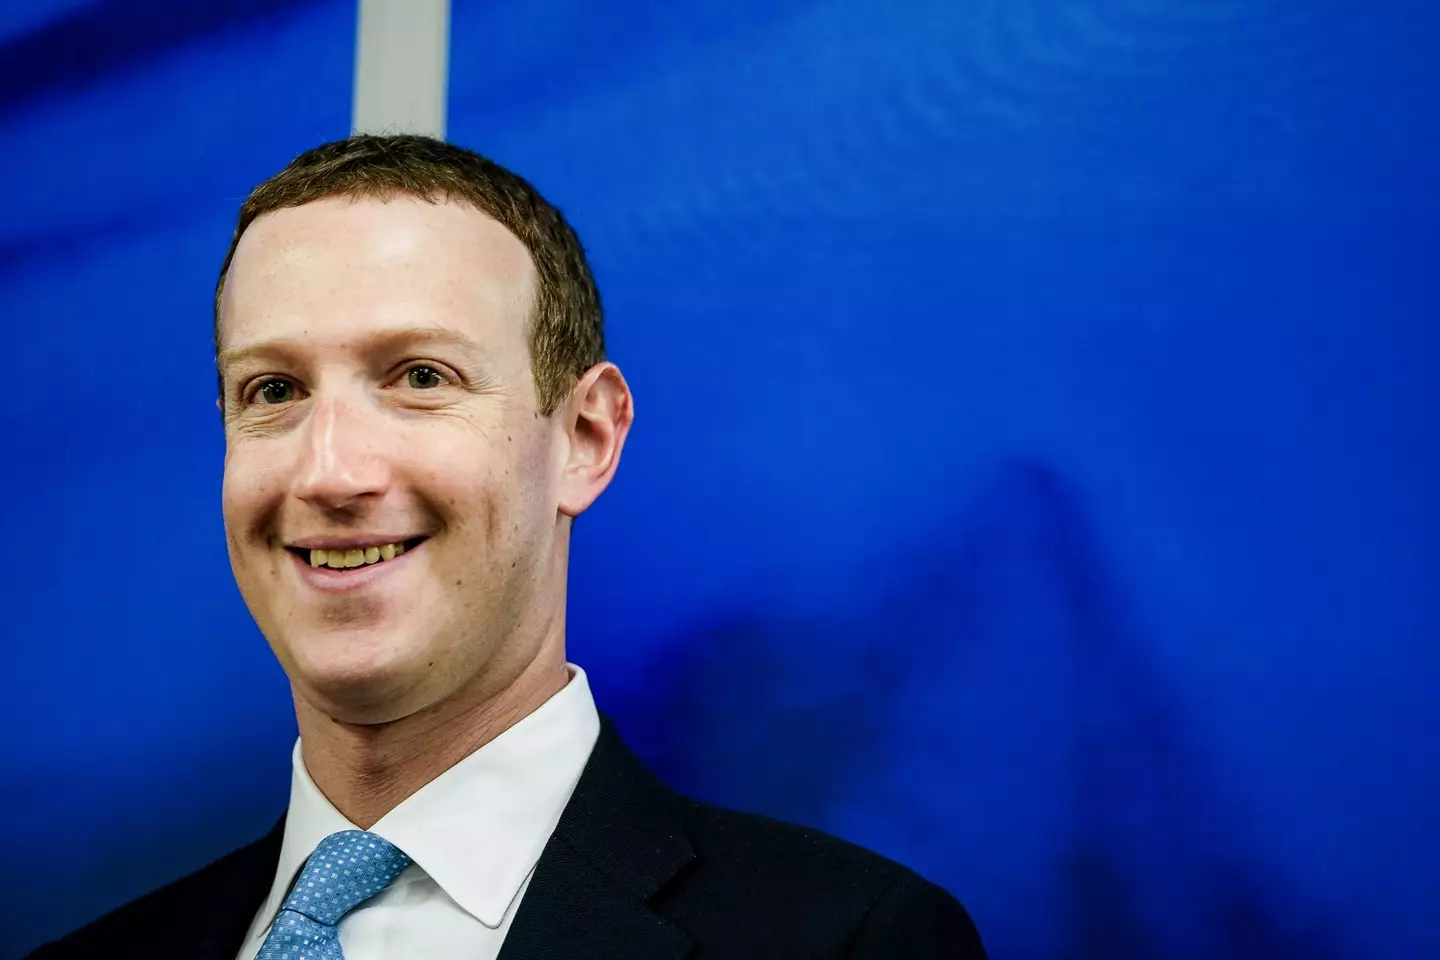 Mark Zuckerberg proposed 26 August for the date of the fight.